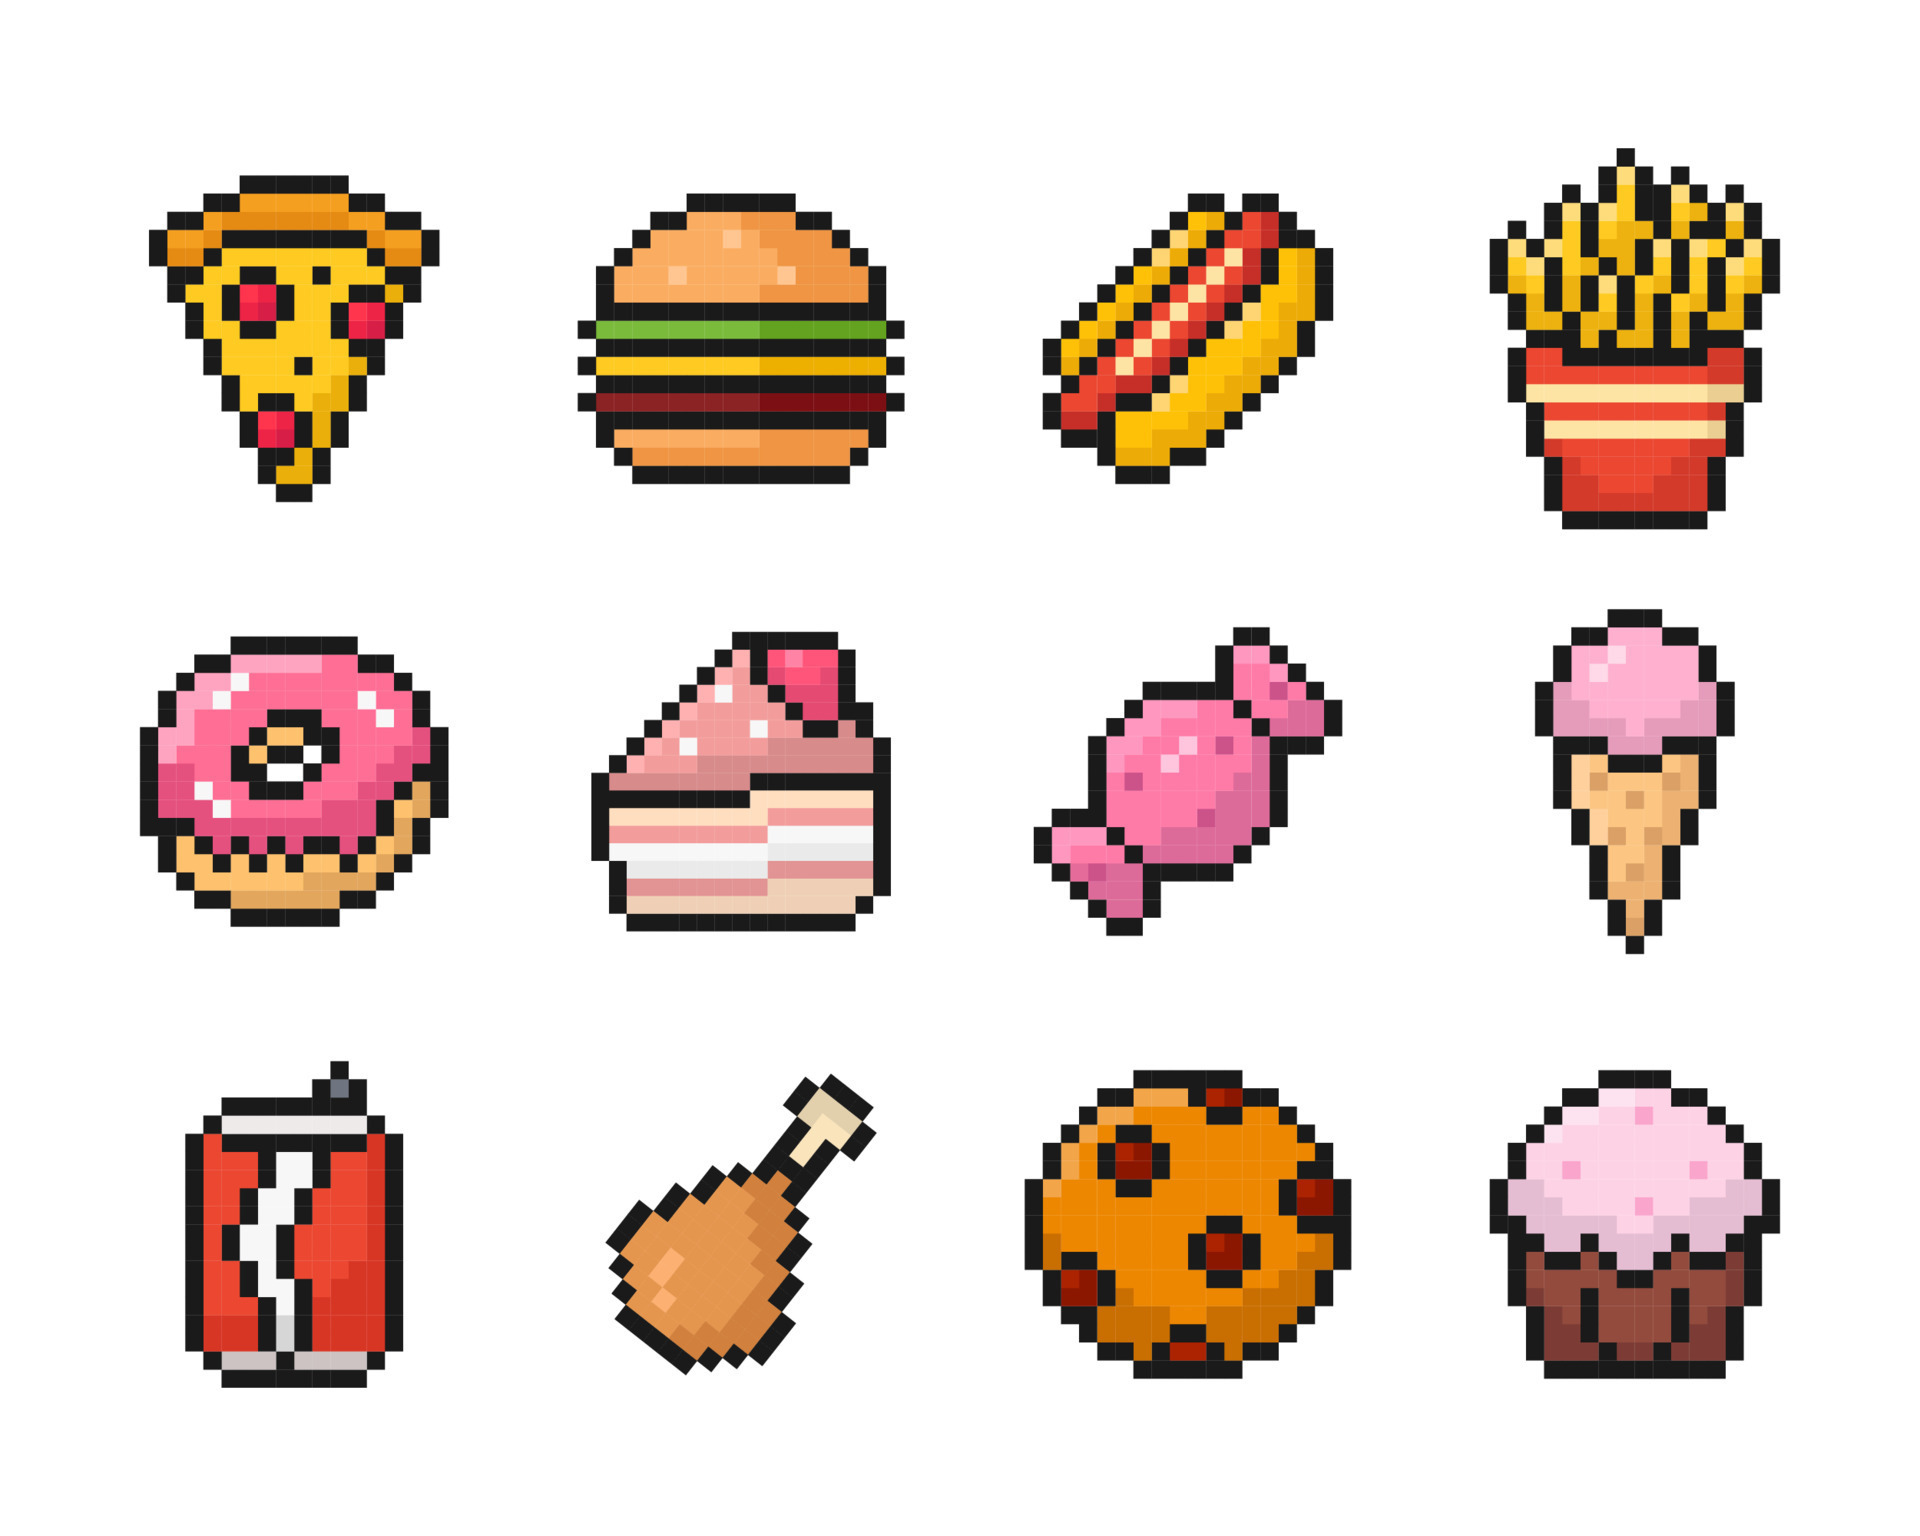 https://static.vecteezy.com/system/resources/previews/024/274/730/original/fast-food-pixel-art-set-of-icons-vintage-8-bit-80s-90s-games-computer-arcade-game-items-cookie-ice-cream-candy-illustration-vector.jpg